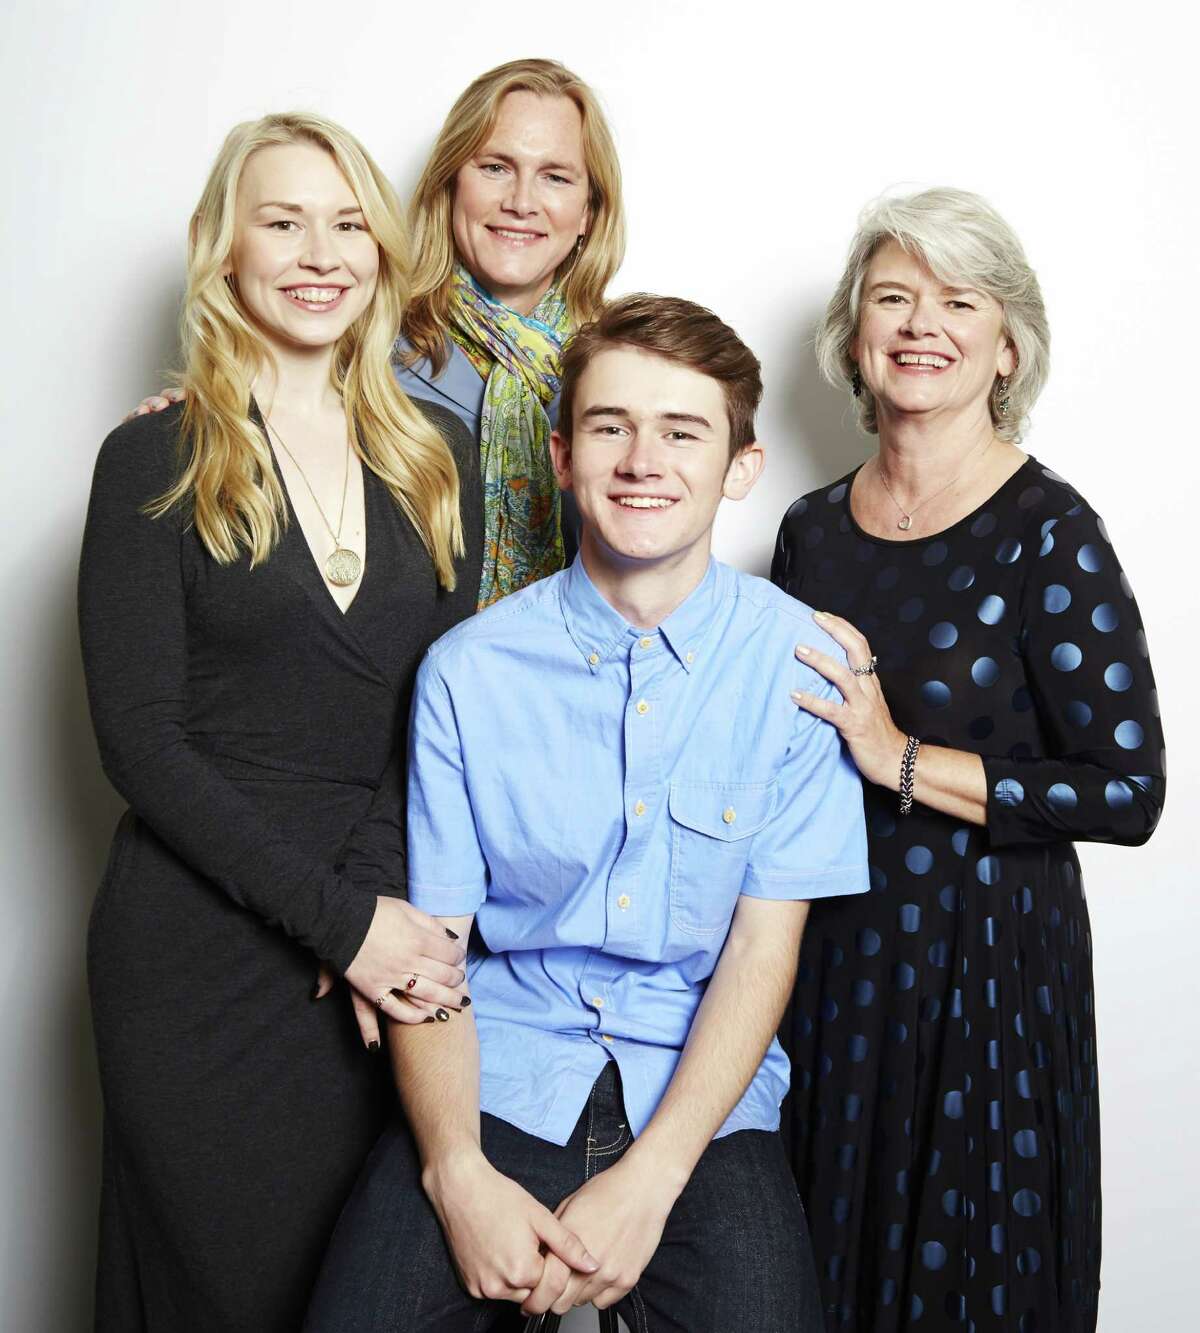 In this June 8, 2015 photo, Sutton Crawford, from left, Carly Lehwald, Ben Lehwald and Suzy Crawford from the ABC Family docu-series "Becoming Us" pose for a portrait in New York. The series airs Monday at 9 p.m. EDT on ABC Family. (Photo by Dan Hallman/Invision/AP)